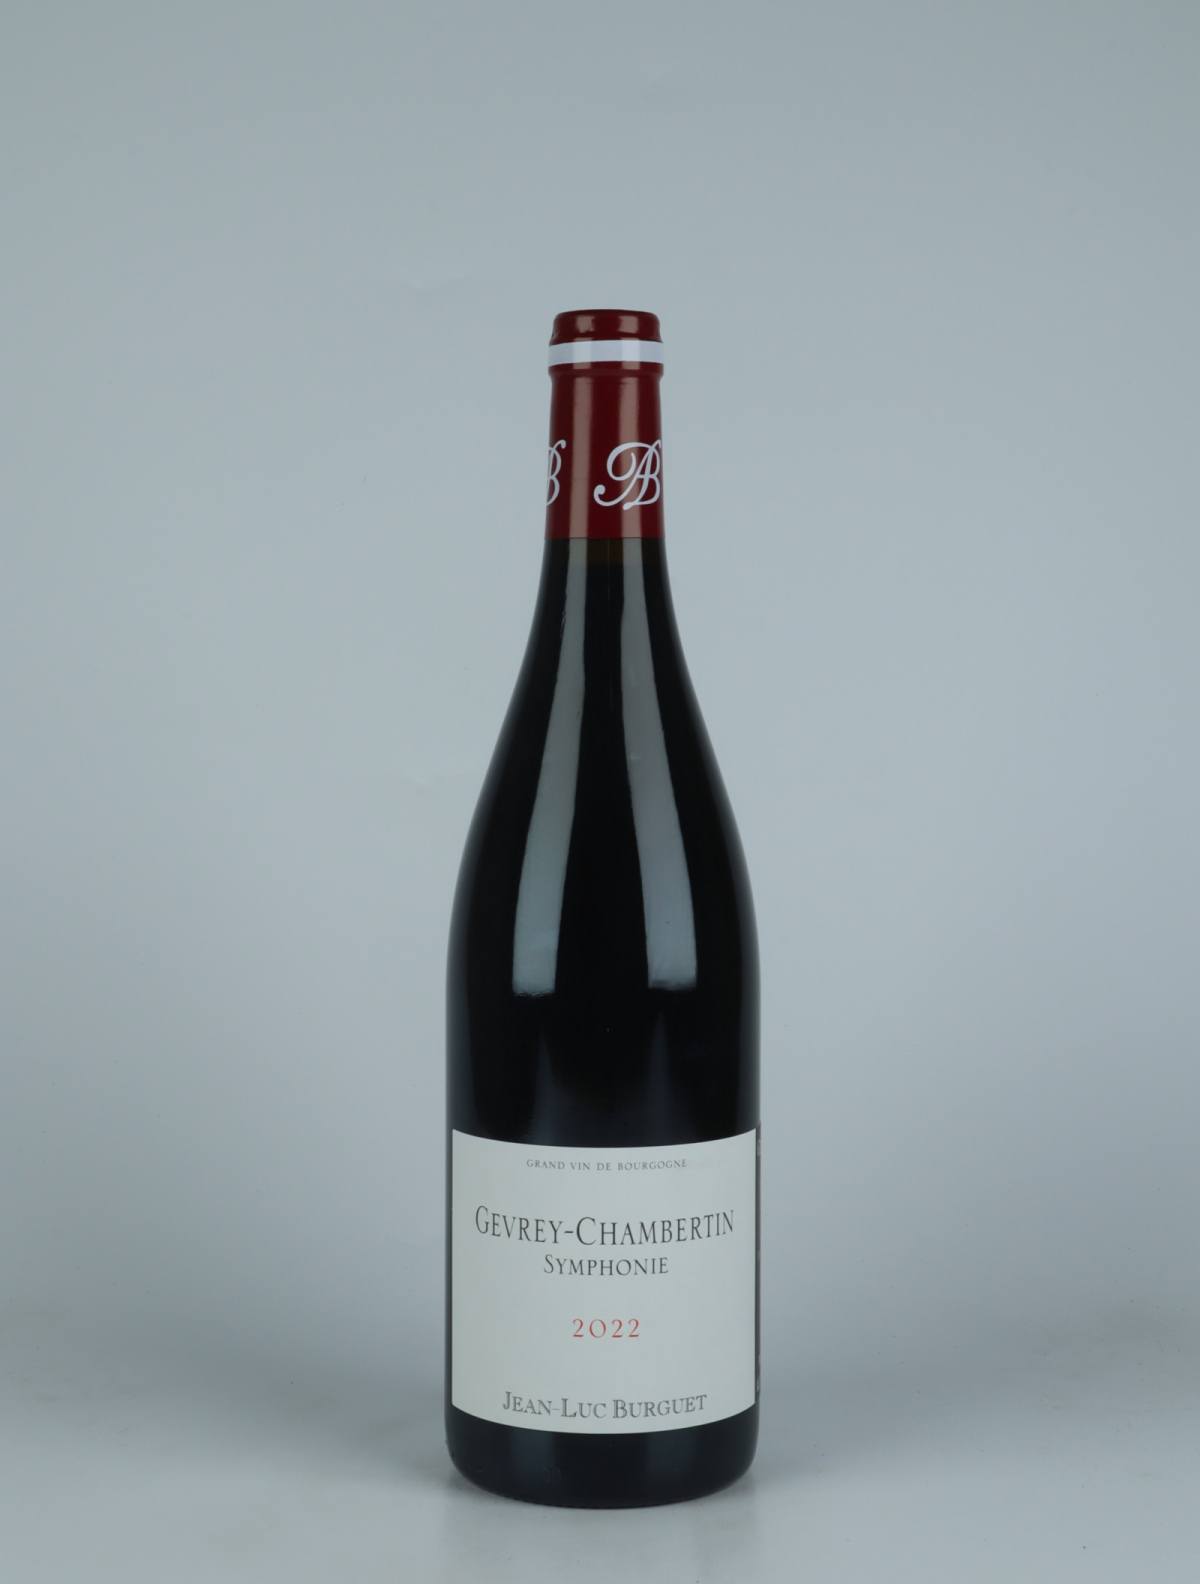 A bottle 2022 Gevrey-Chambertin - Symphonie Red wine from Jean-Luc & Eric Burguet, Burgundy in France